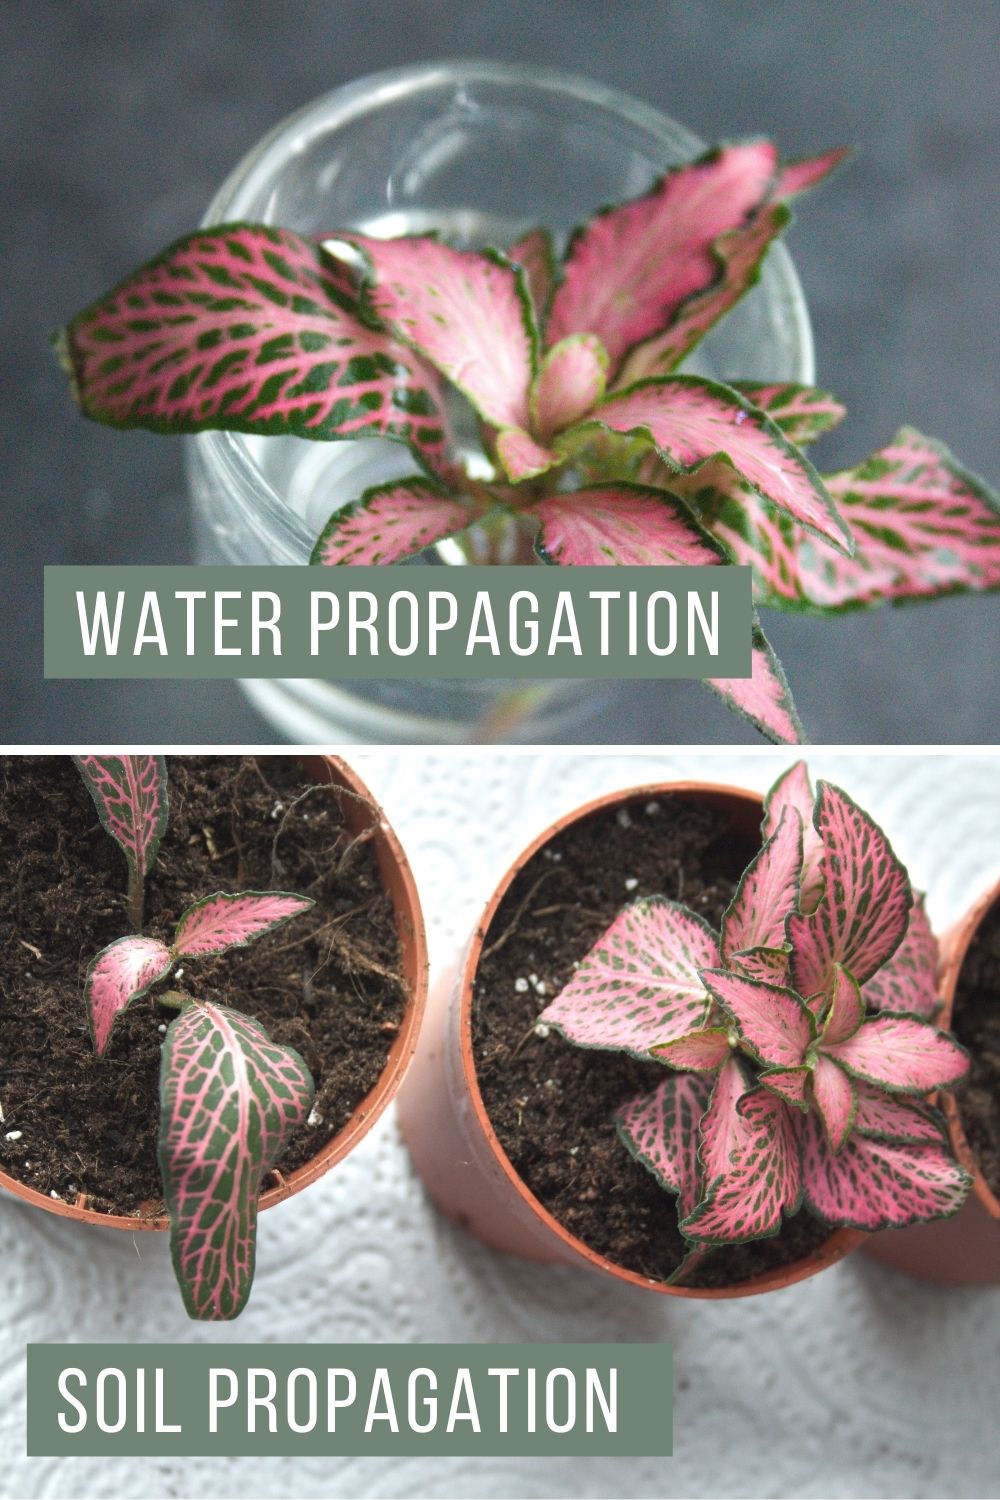 Example of Fittonia propagation (nerve plant) in water and soil.